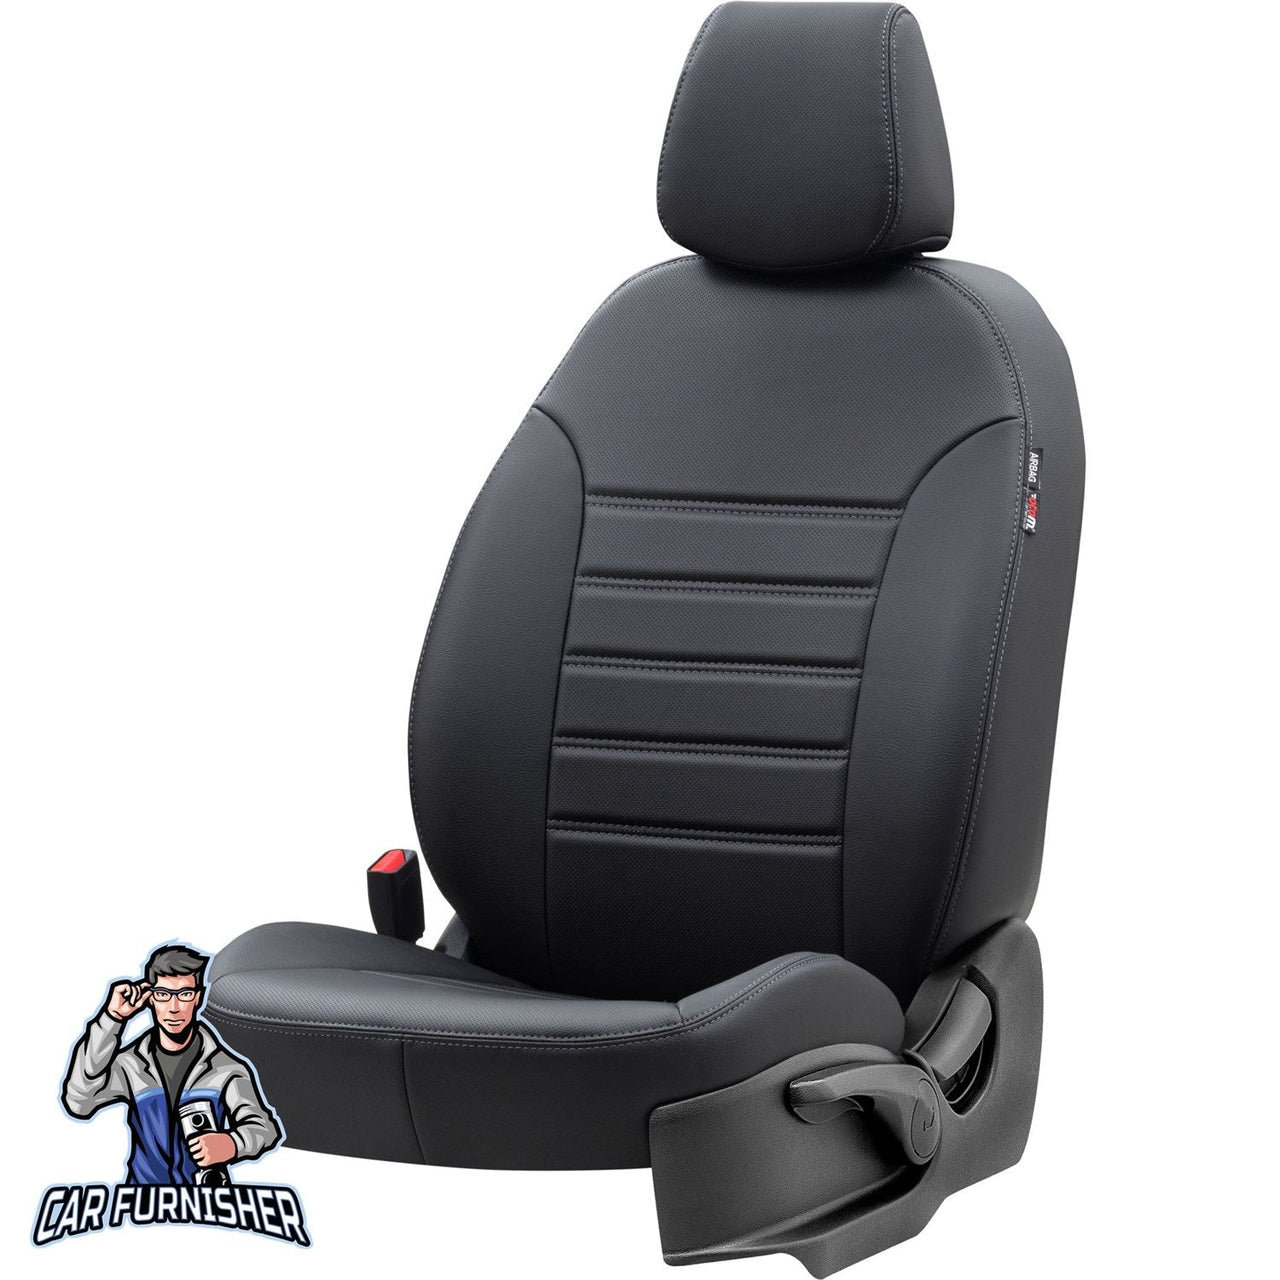 Man TGS Seat Cover Istanbul Leather Design Black Front Seats (2 Seats + Handrest + Headrests) Leather